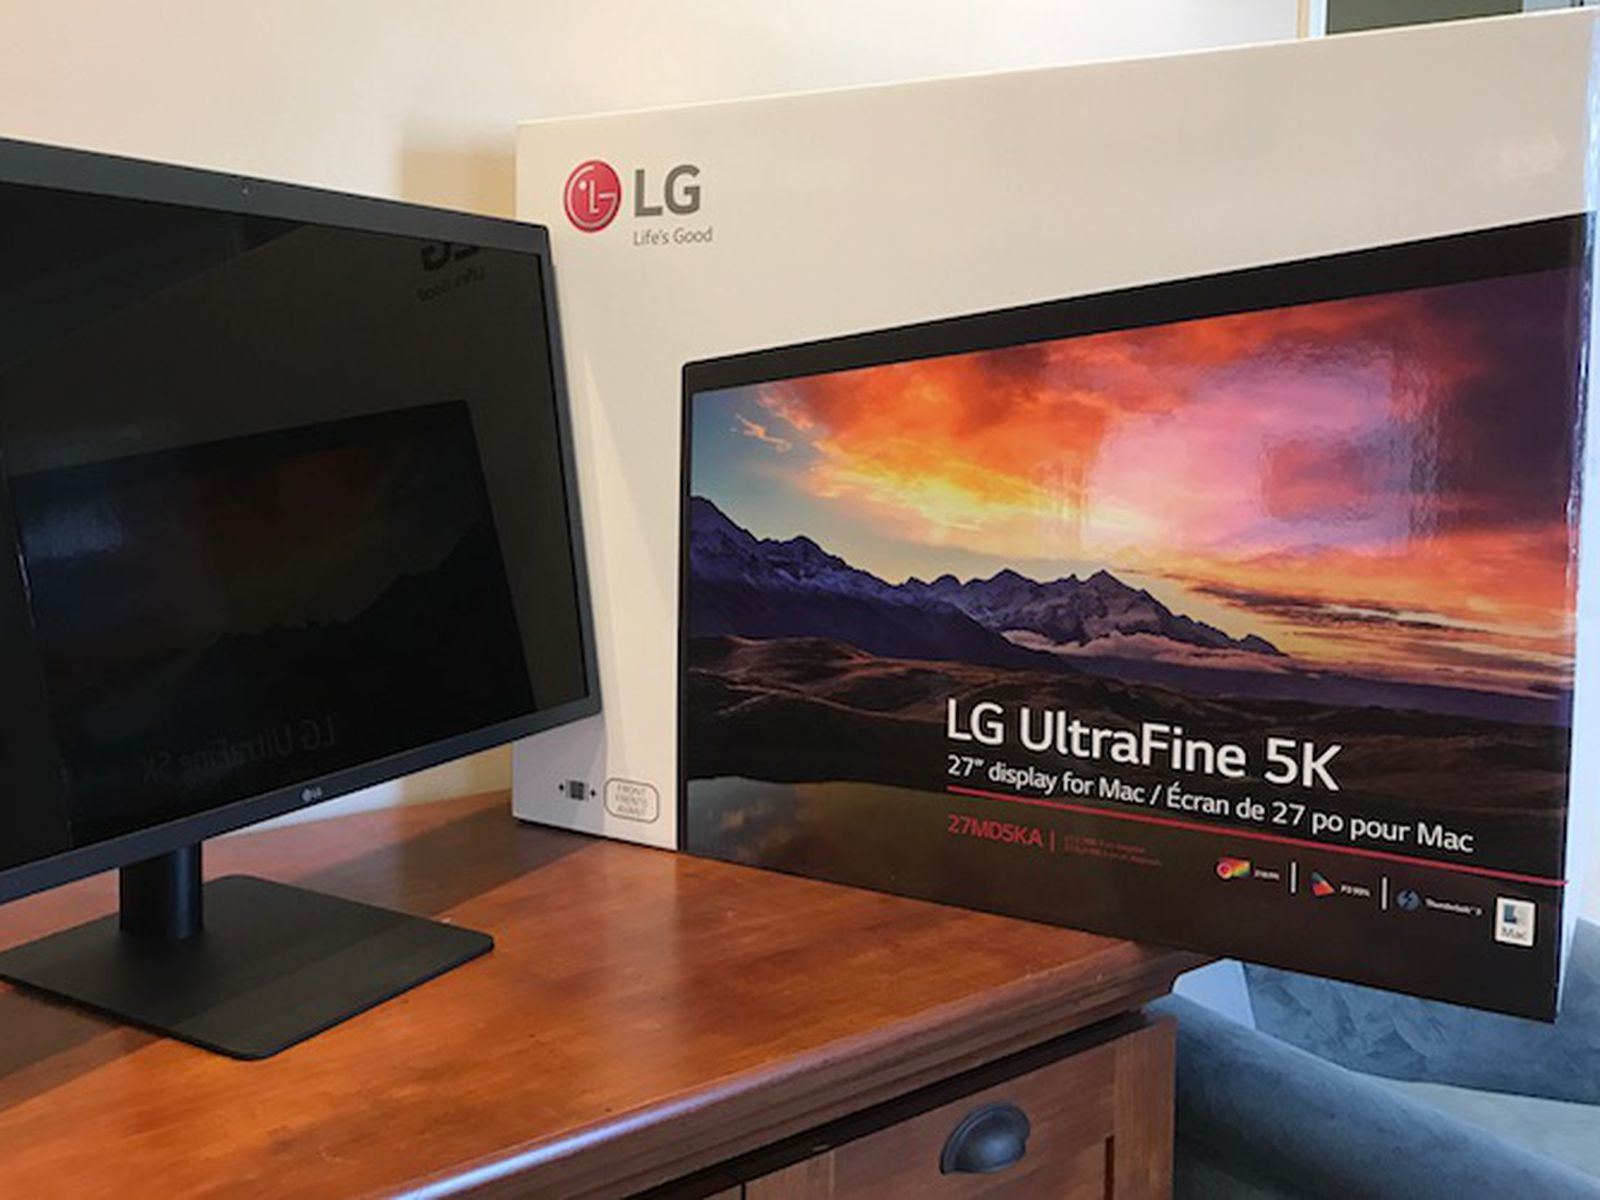 LG's UltraFine 5K Display Is a Worthy Companion to the New MacBook